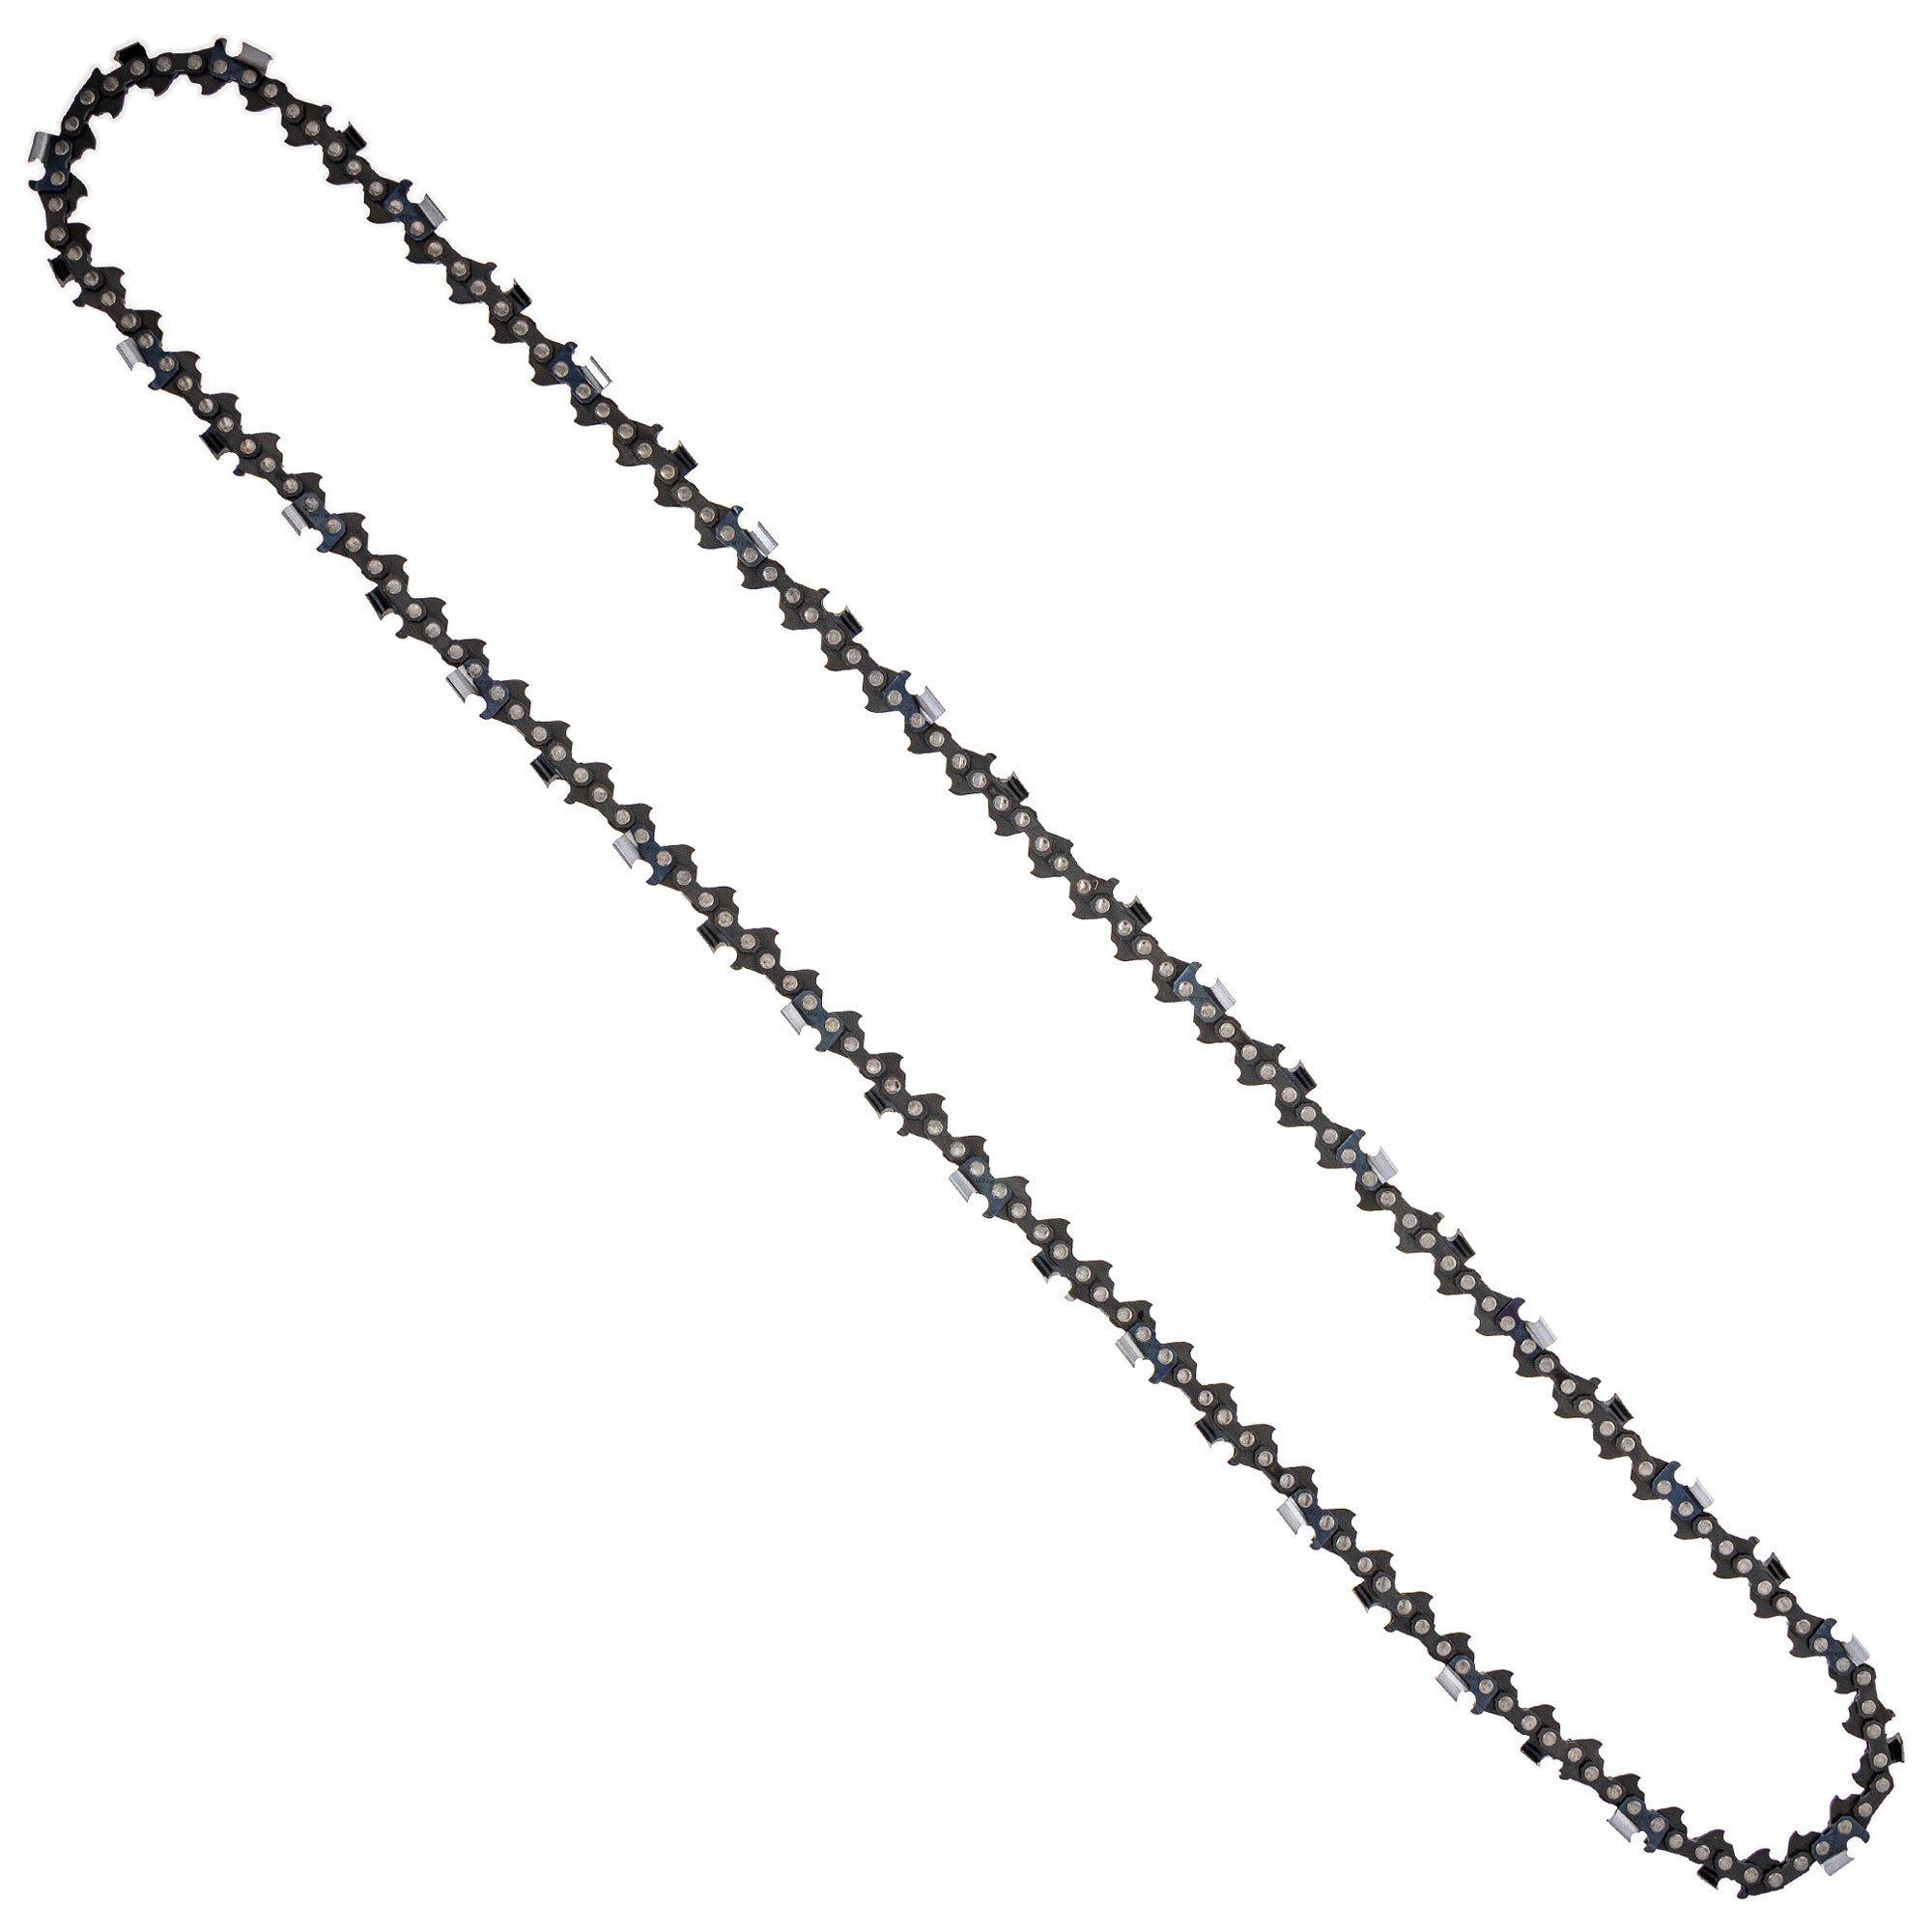 8TEN 810-CCC2352H Chain 3-Pack for zOTHER Oregon MS 066 064 056